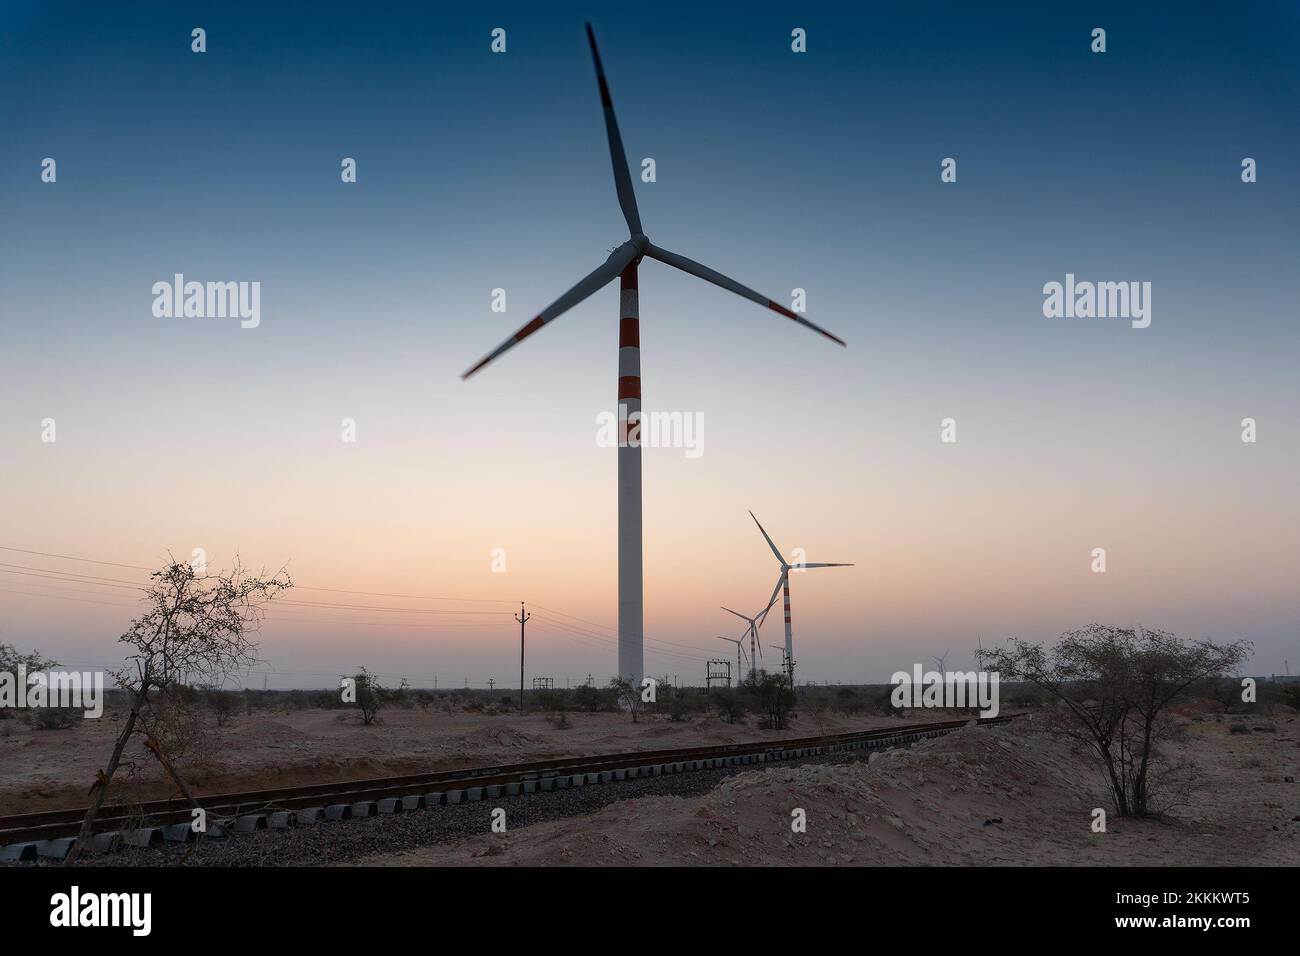 Pre dawn light in desert sky with Electrical power generating wind mills producing alterative eco friendly green energy for consumption by local peopl Stock Photo